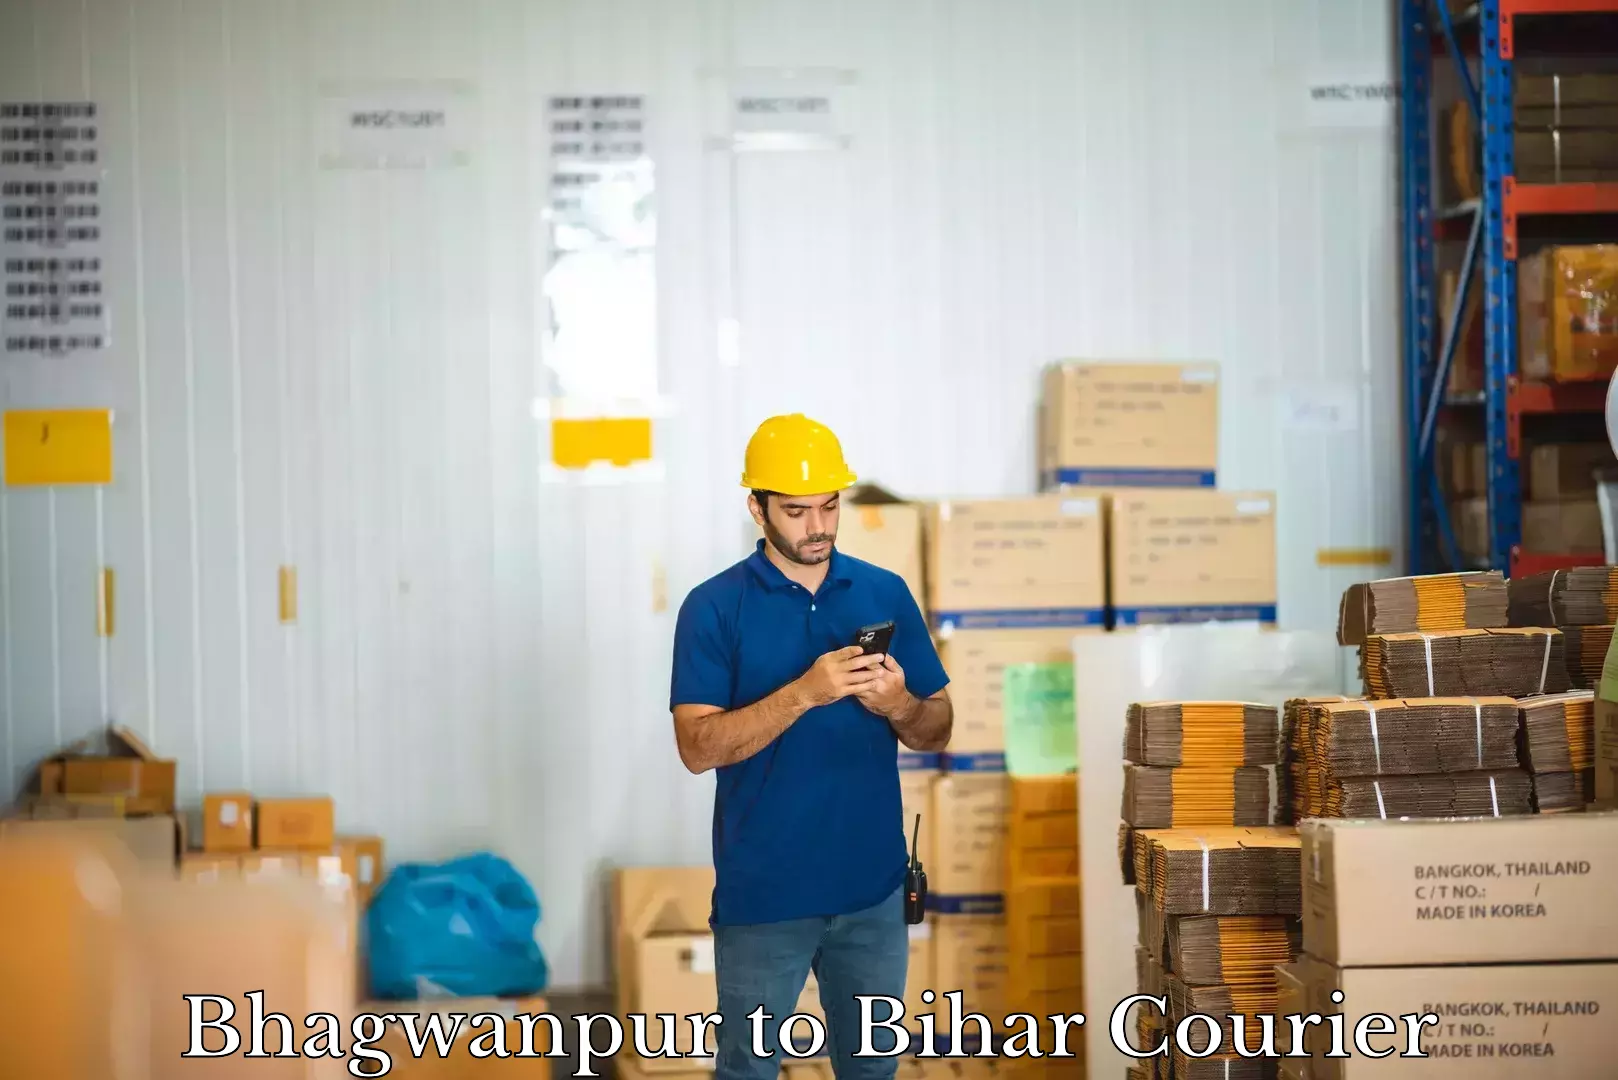 Hassle-free luggage shipping in Bhagwanpur to Dinara